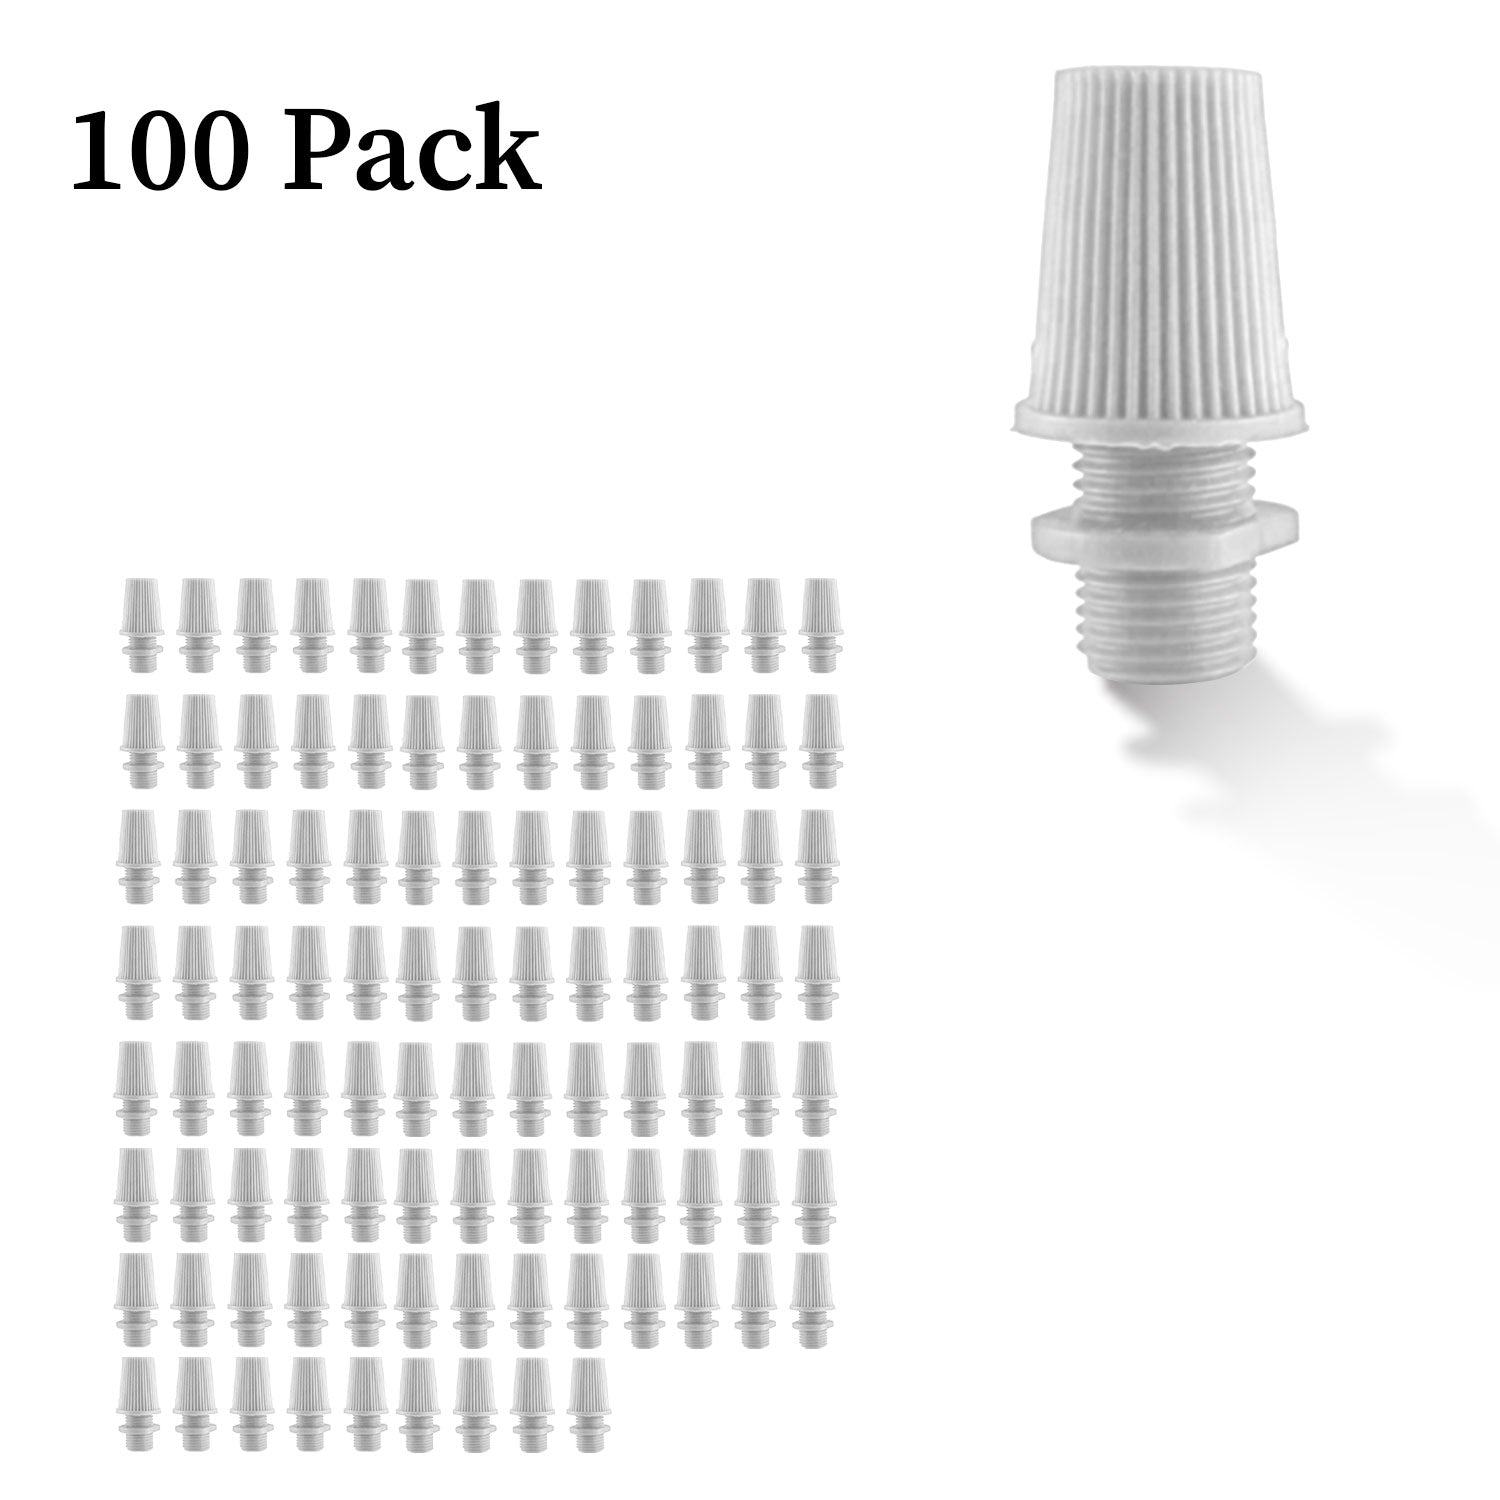 100 pack 100mm white cable cord grip lock